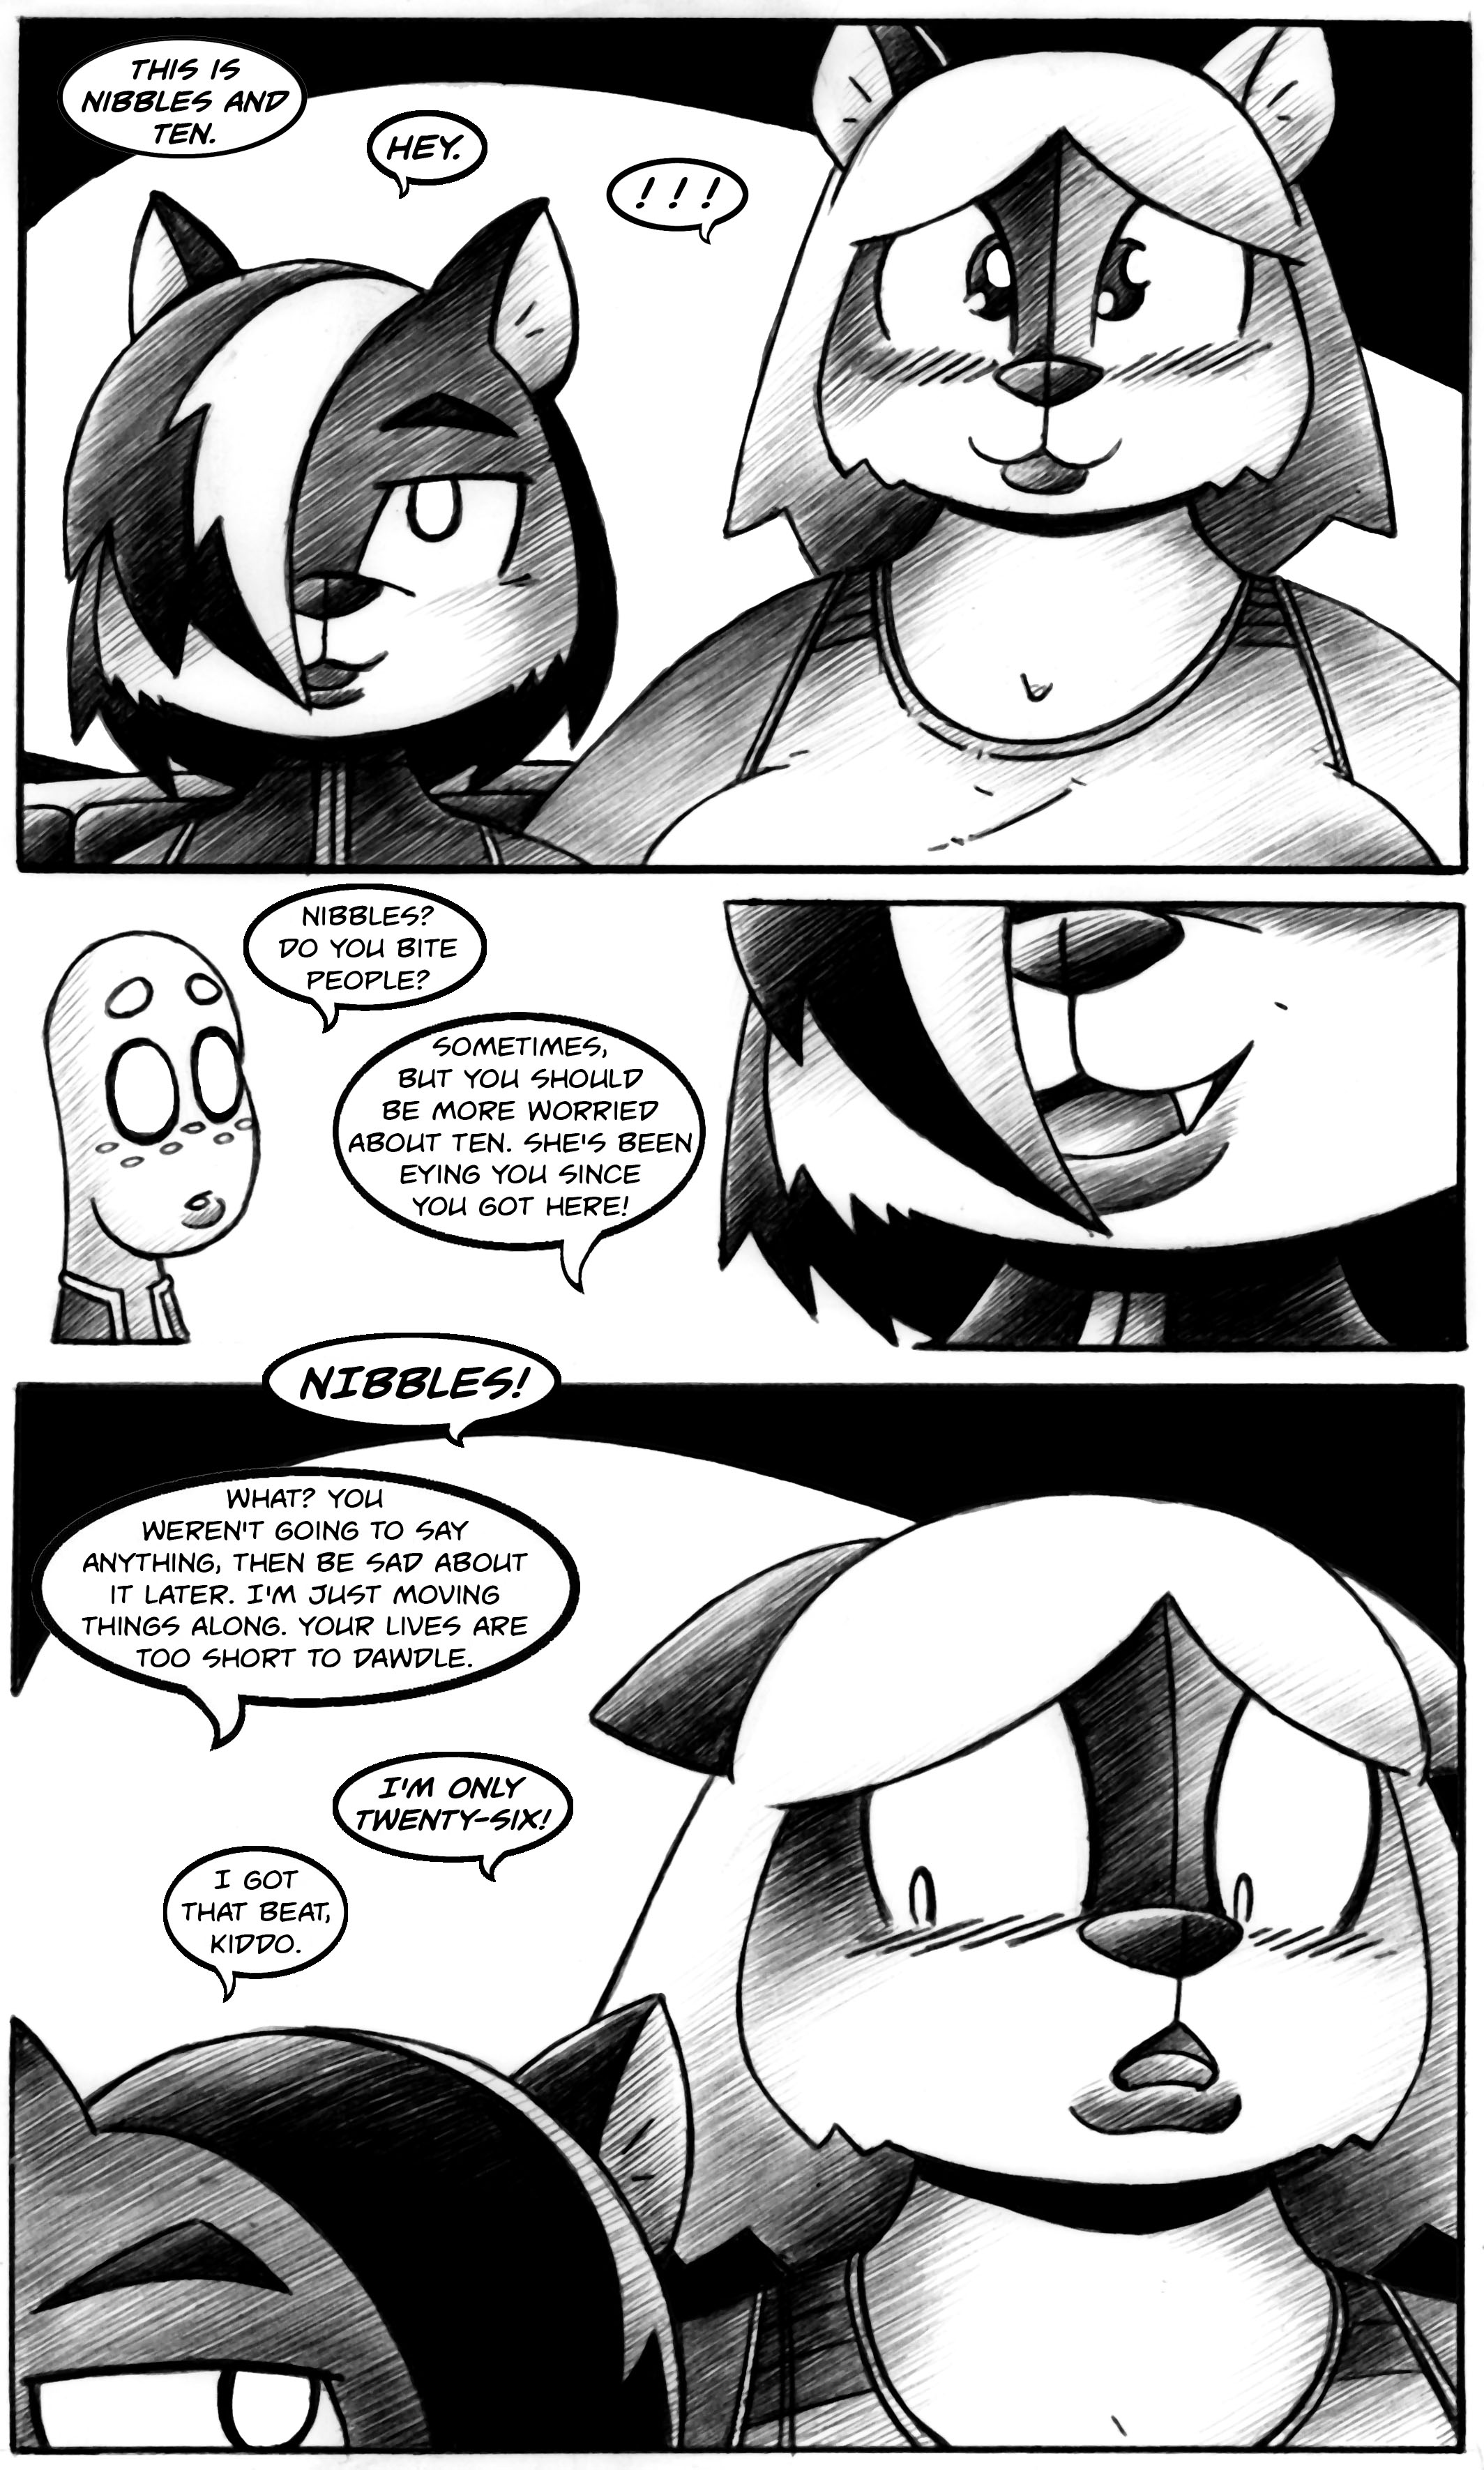 Waypoint: Chapter 4, Page 109